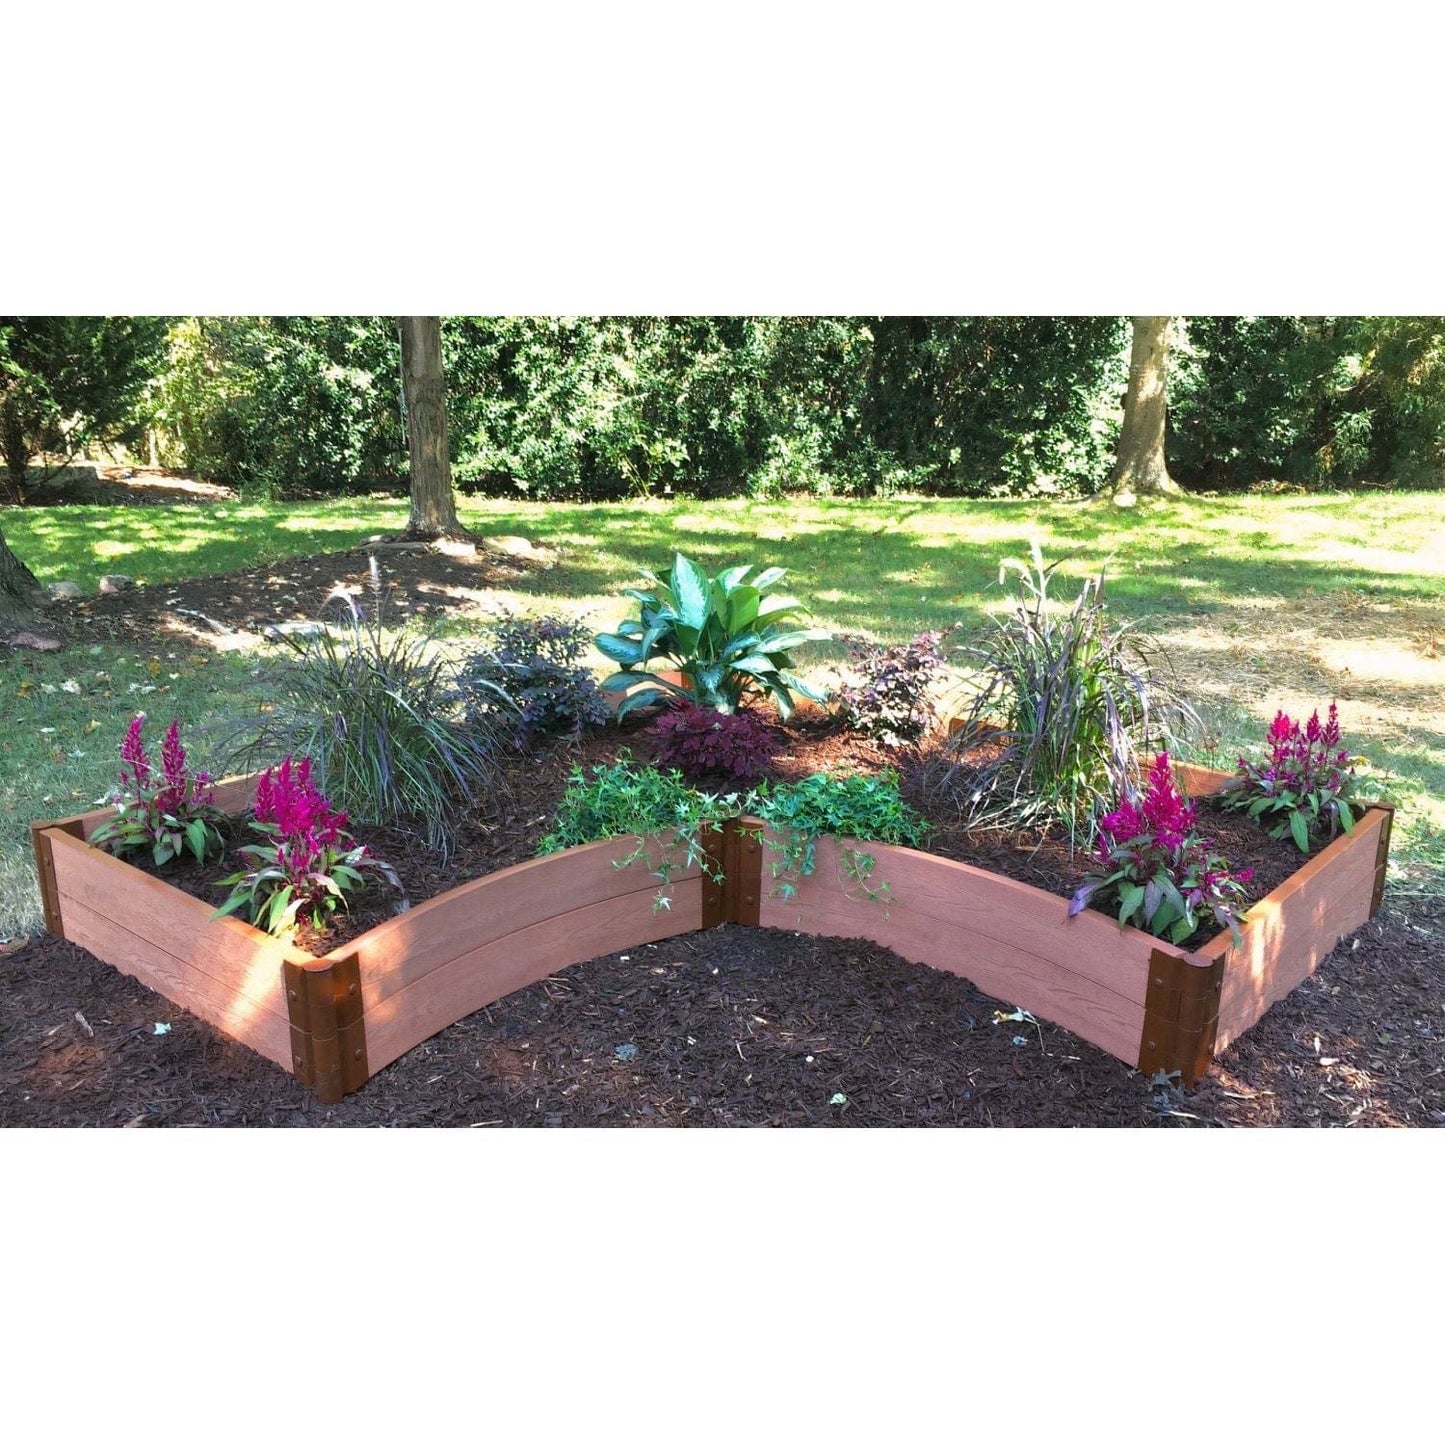 Frame It All Gardening Accessories Frame It All | Tool-Free Grand Concourse Interior Curved Corner Raised Garden Bed 8' X 8' X 11" - Weathered Wood - 1" Profile 800002027